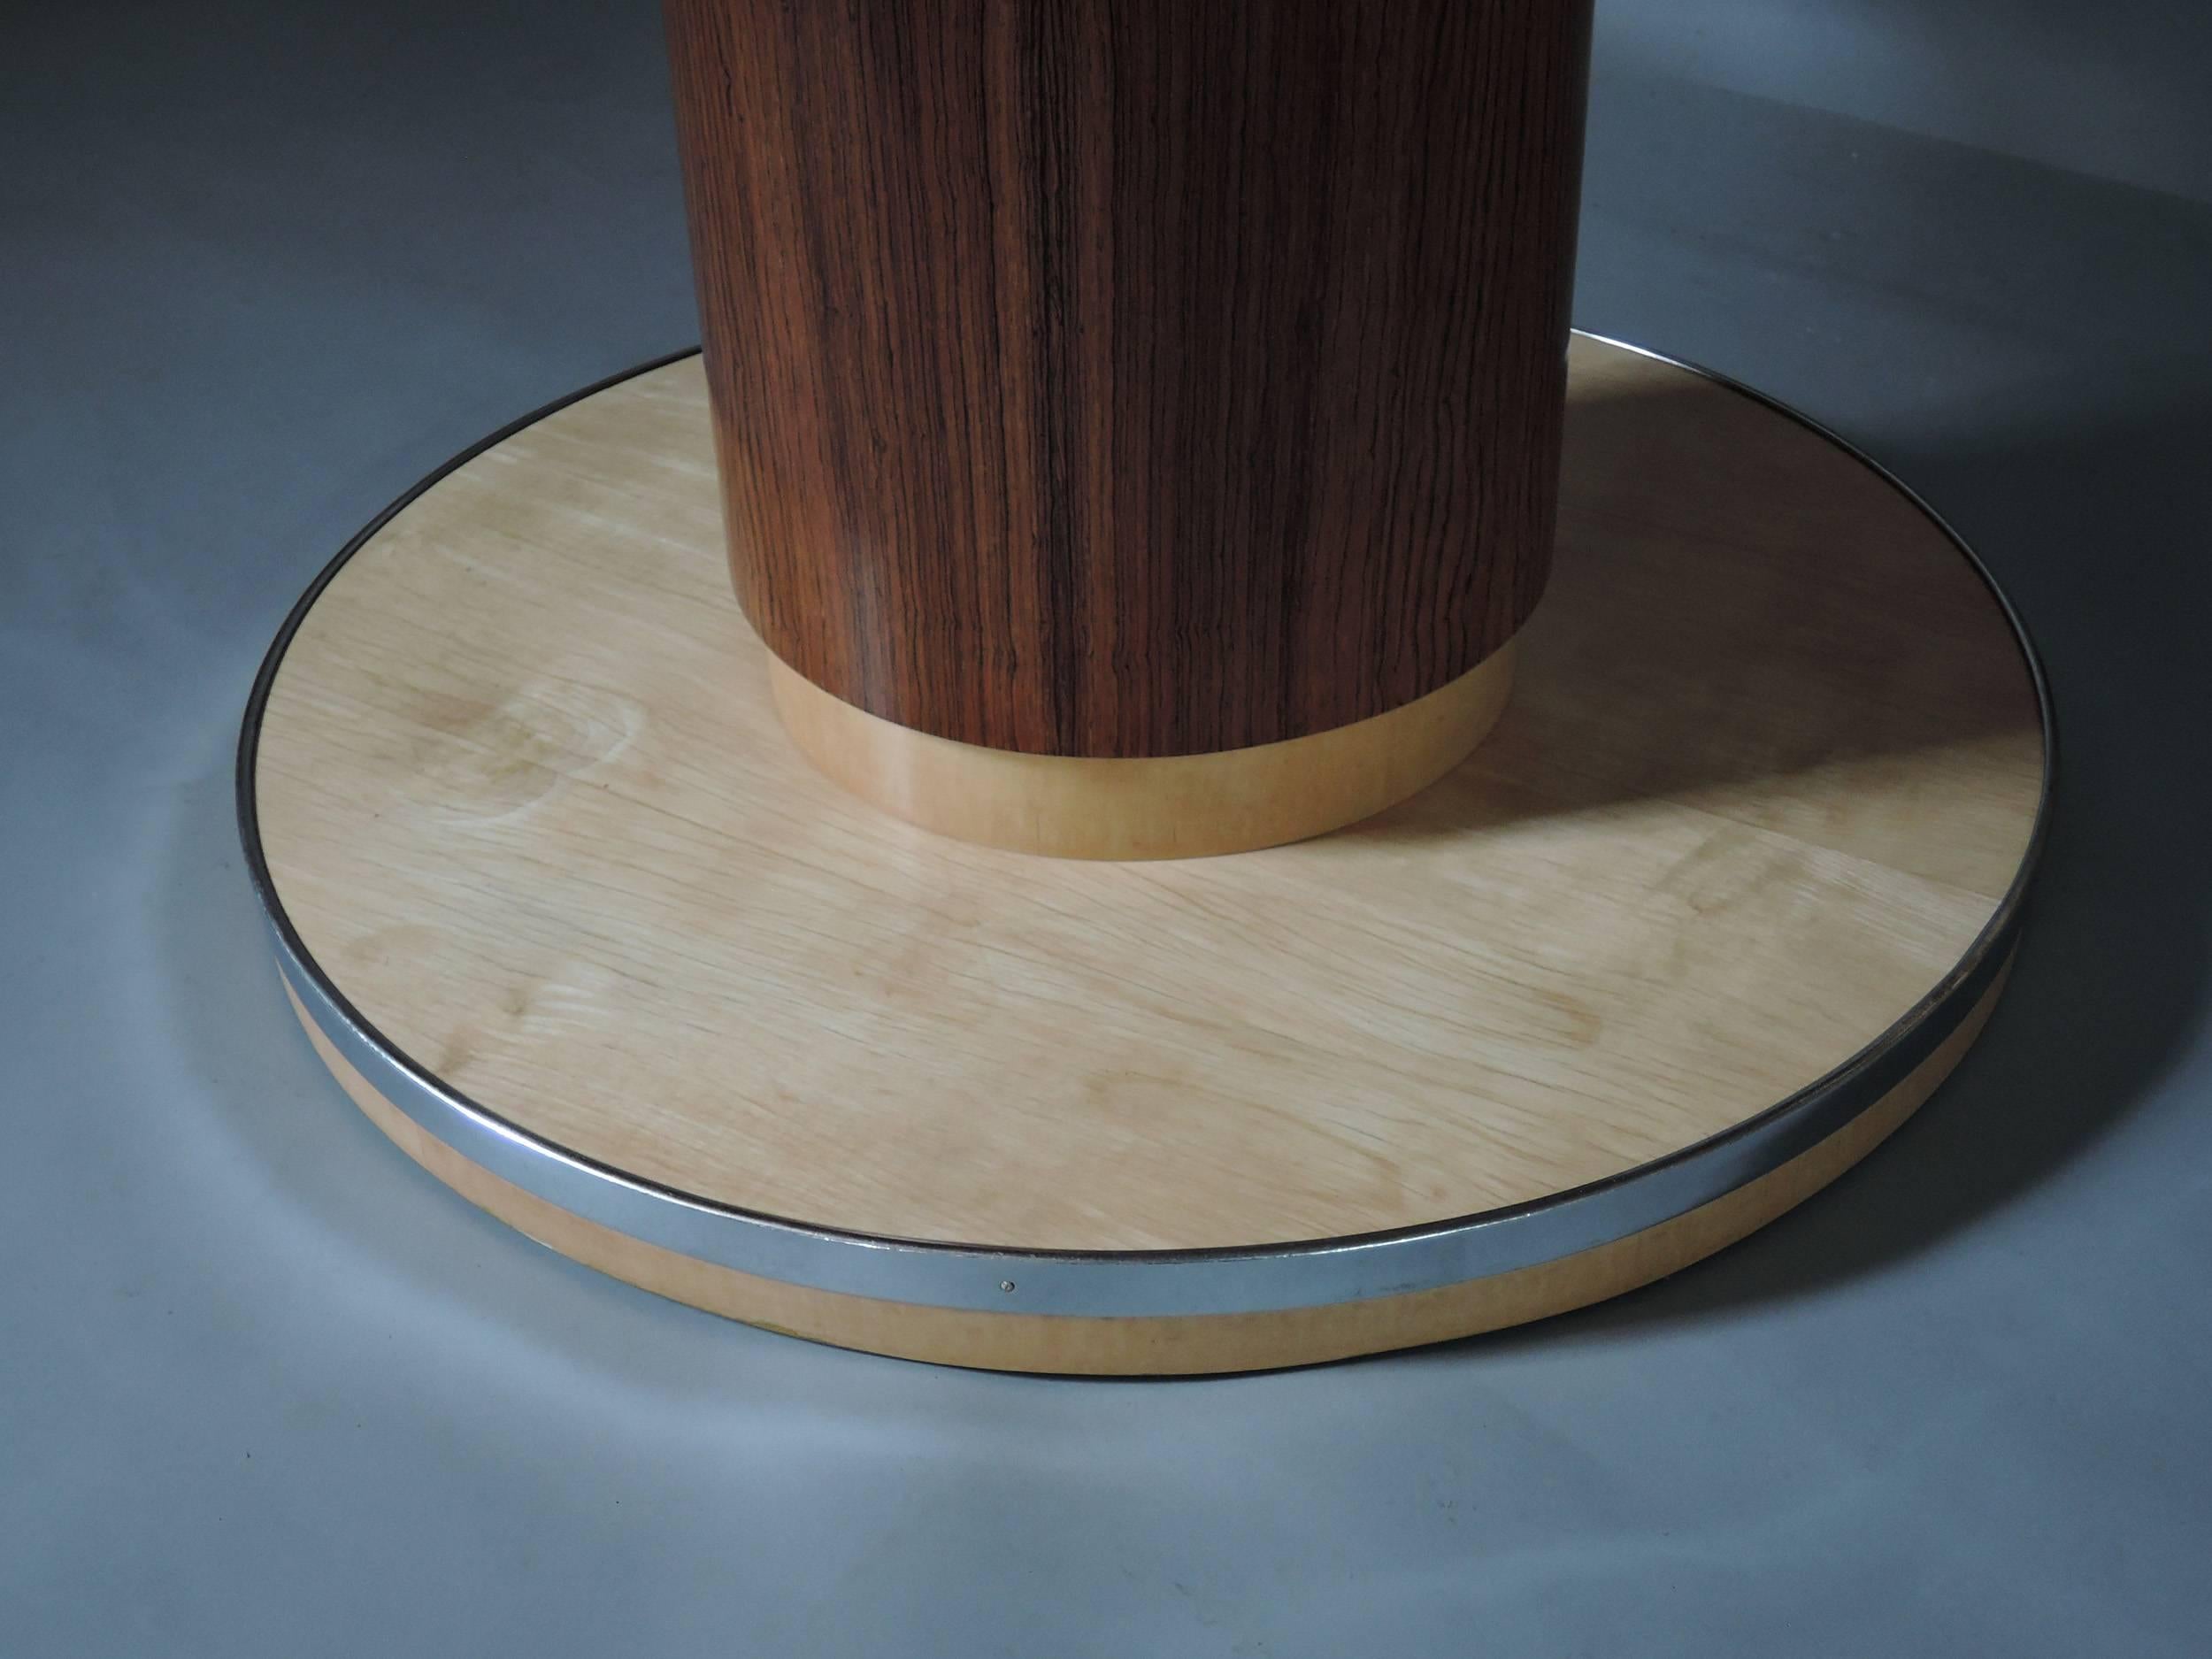 A Fine Round Art Deco Extendable Dining Table by De Coene  1